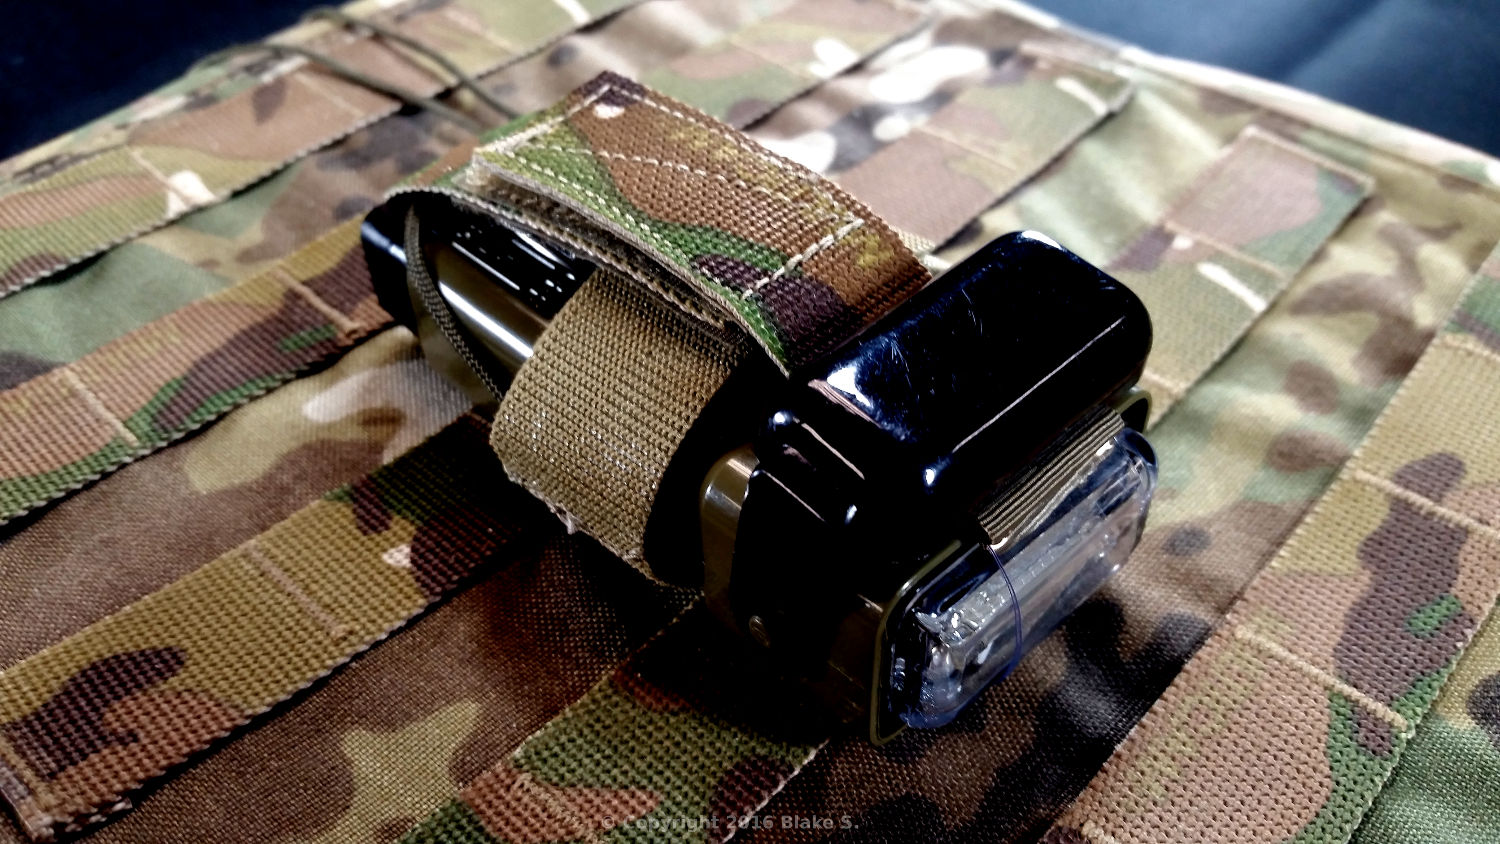 Omnimount MS2000 Strobe Pouch by Omnitac. Can be mounted vertically, horizontally, Velcro, or on a belt. Shown in Multicam.